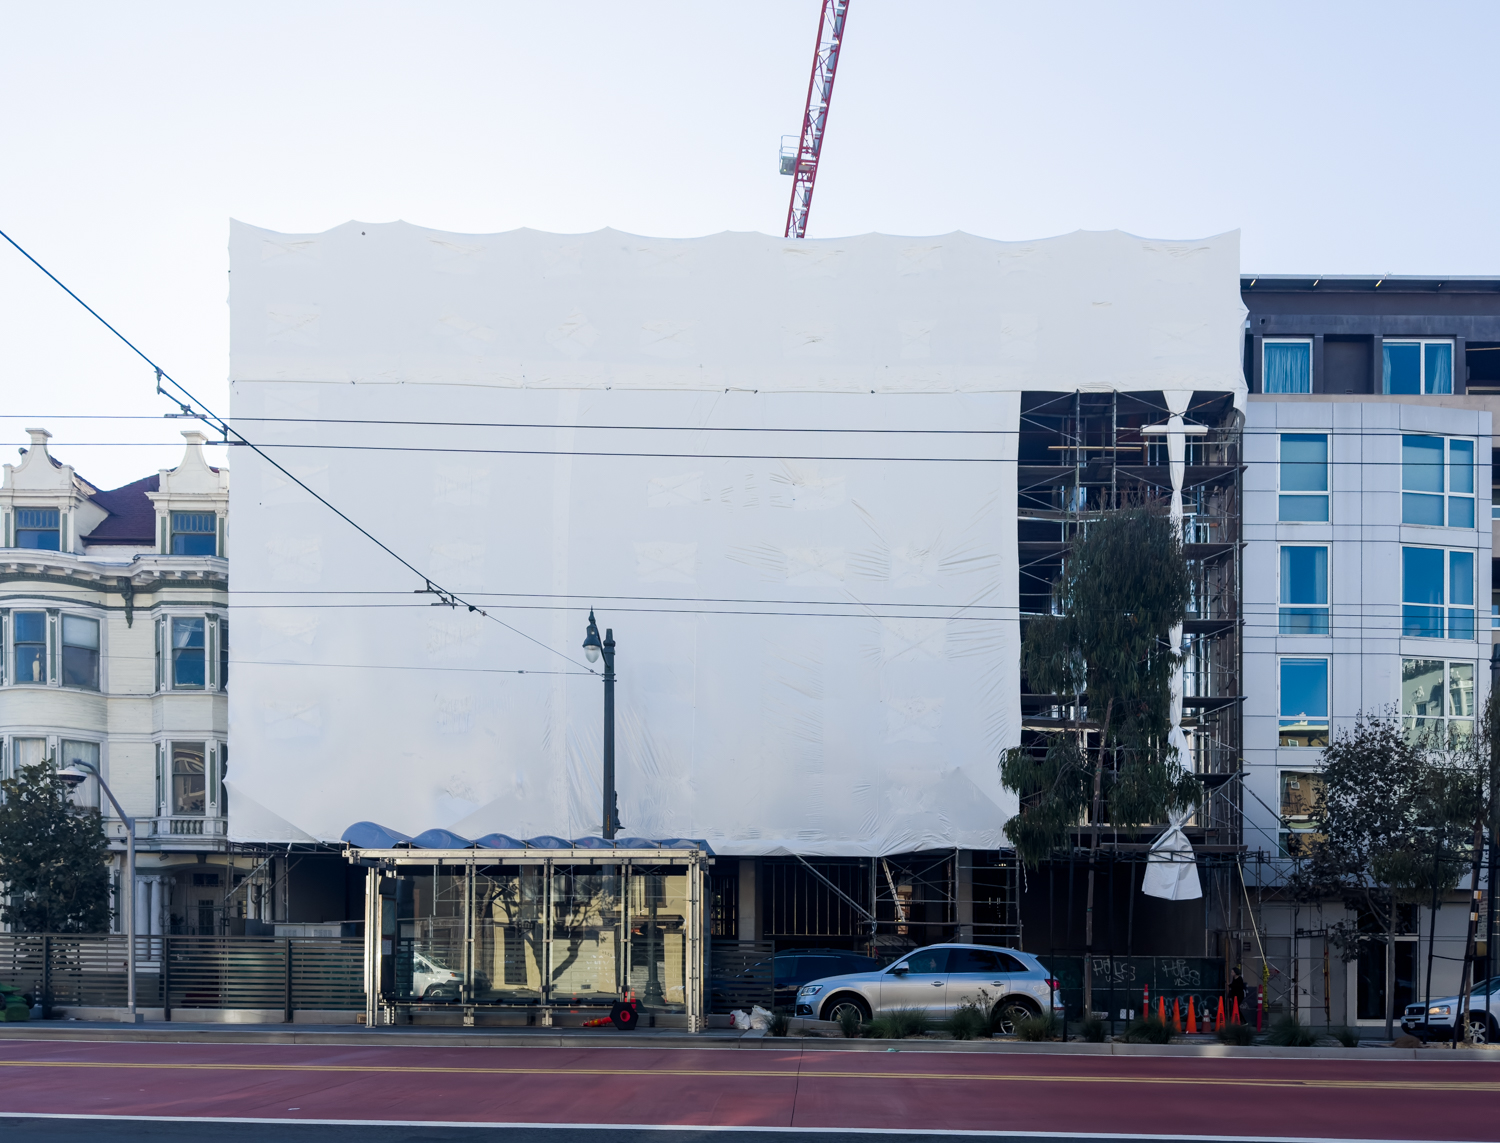 2525 Van Ness Avenue from across the street, image by Andrew Campbell Nelson